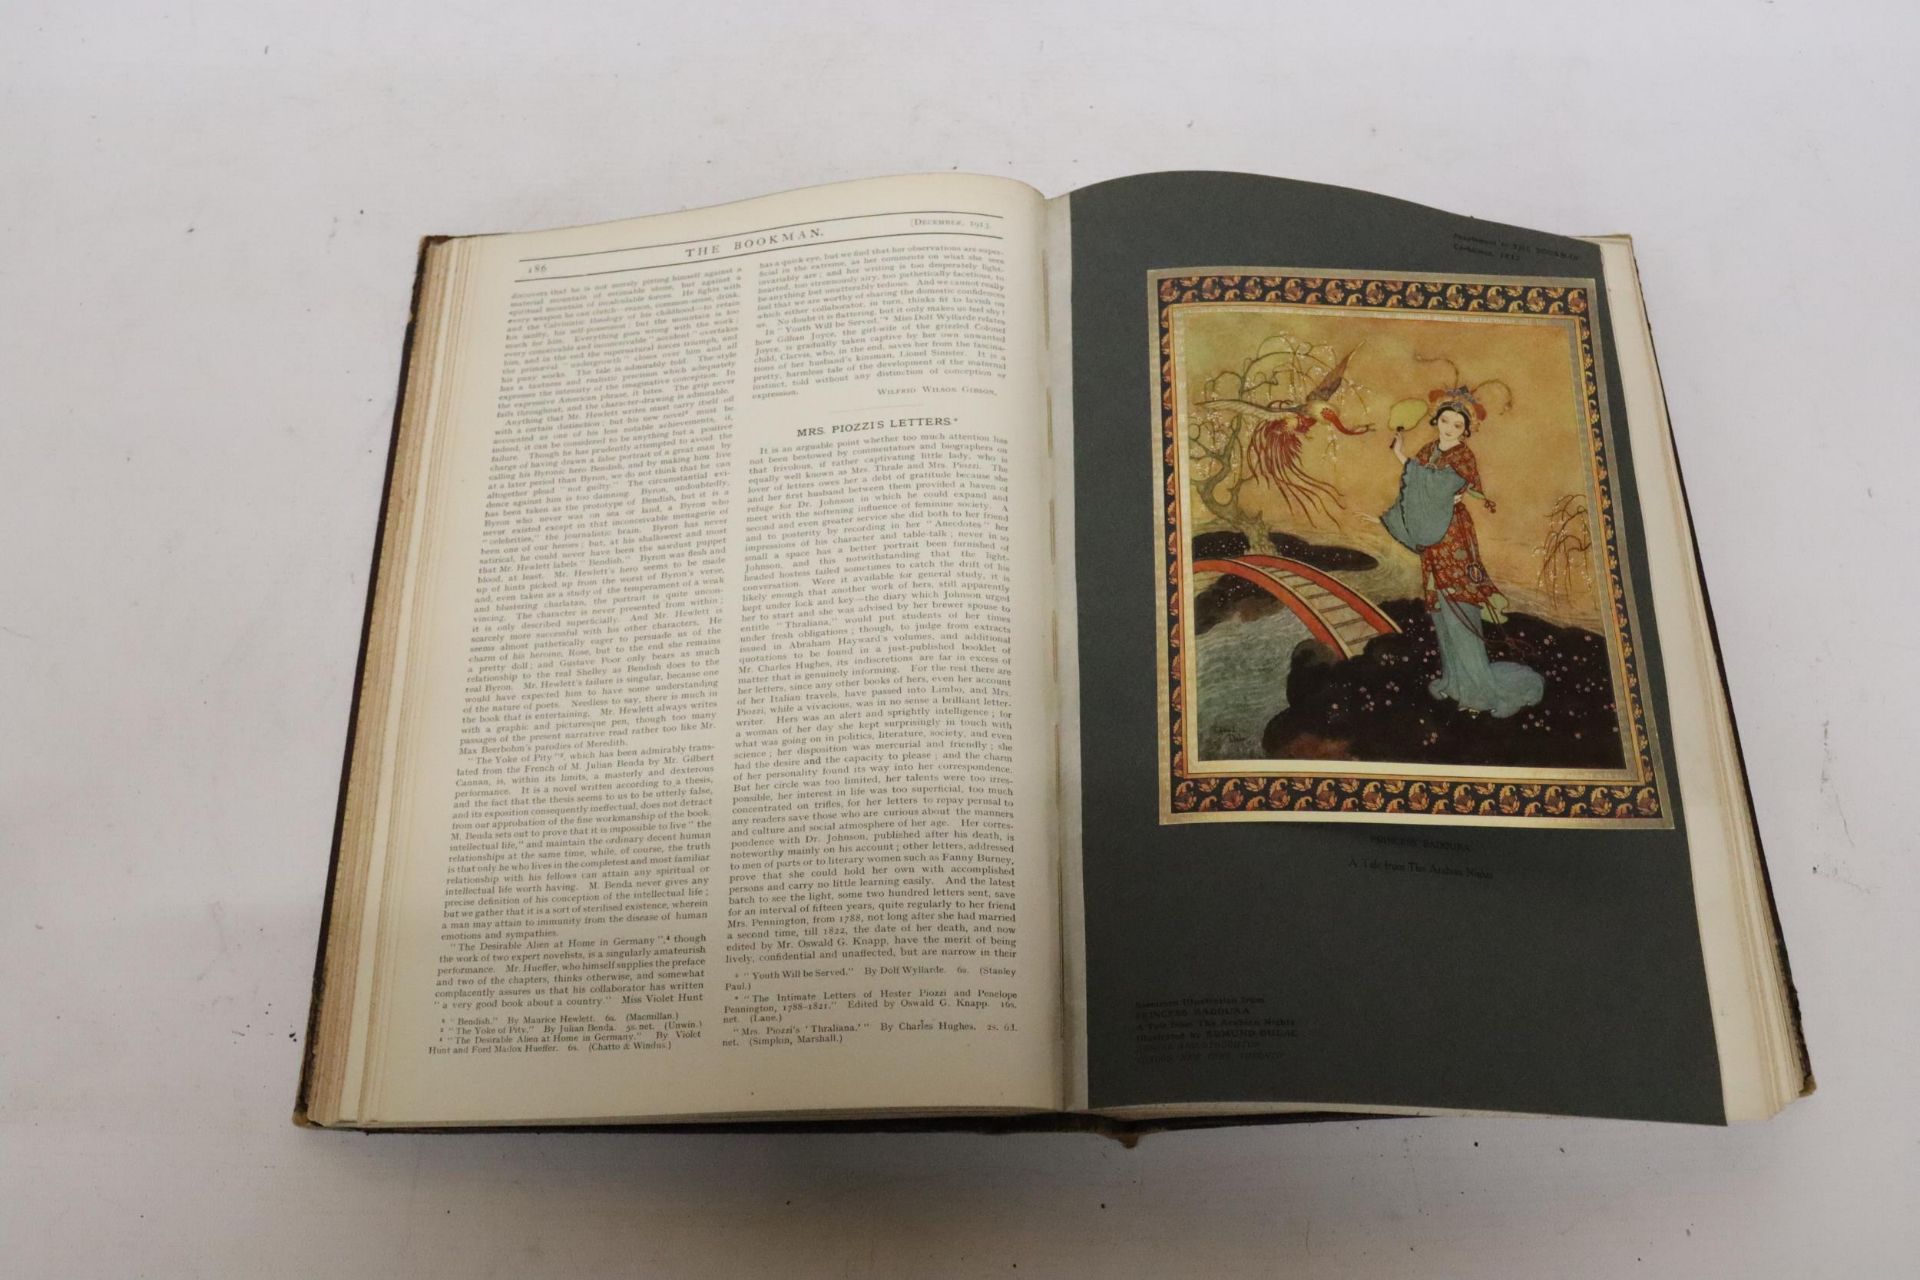 TWO LARGE VOLUMES OF "THE BOOKMAN" 1913-1914 AND 1918-1919 - Image 7 of 8